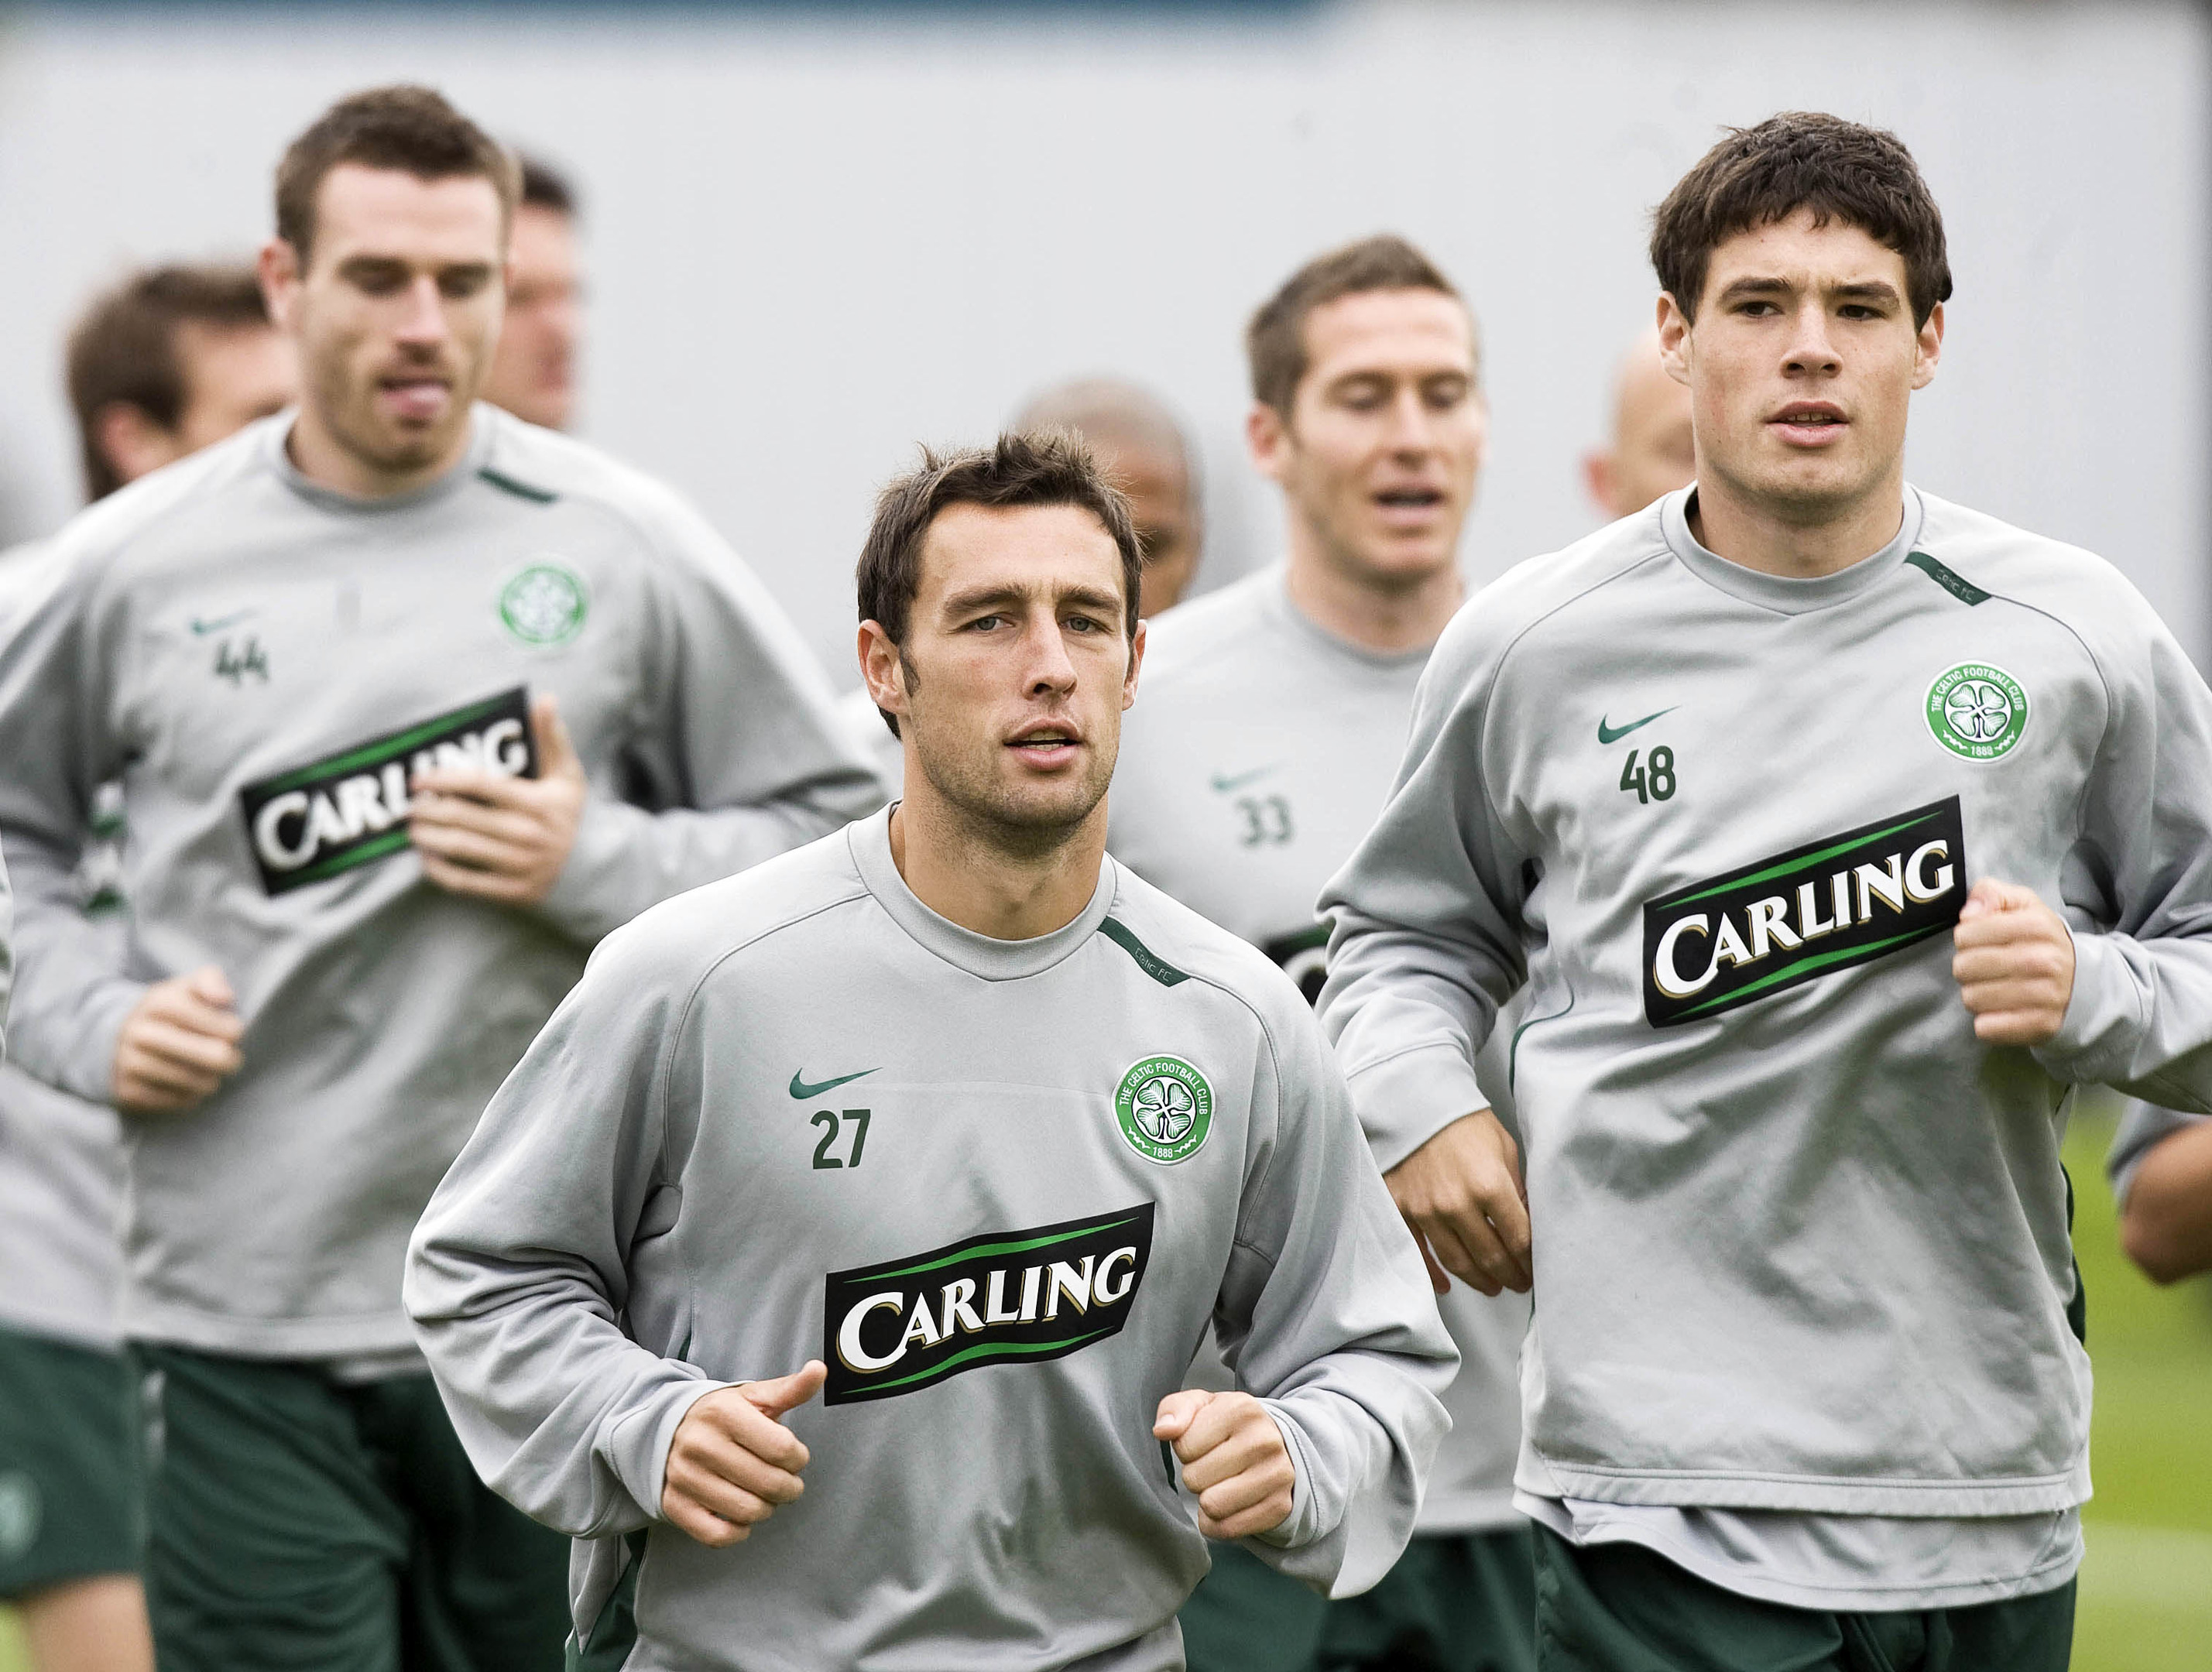 Celtic's Scott McDonald (centre) and Darren O'Dea (right) lead the way during training (SNS)